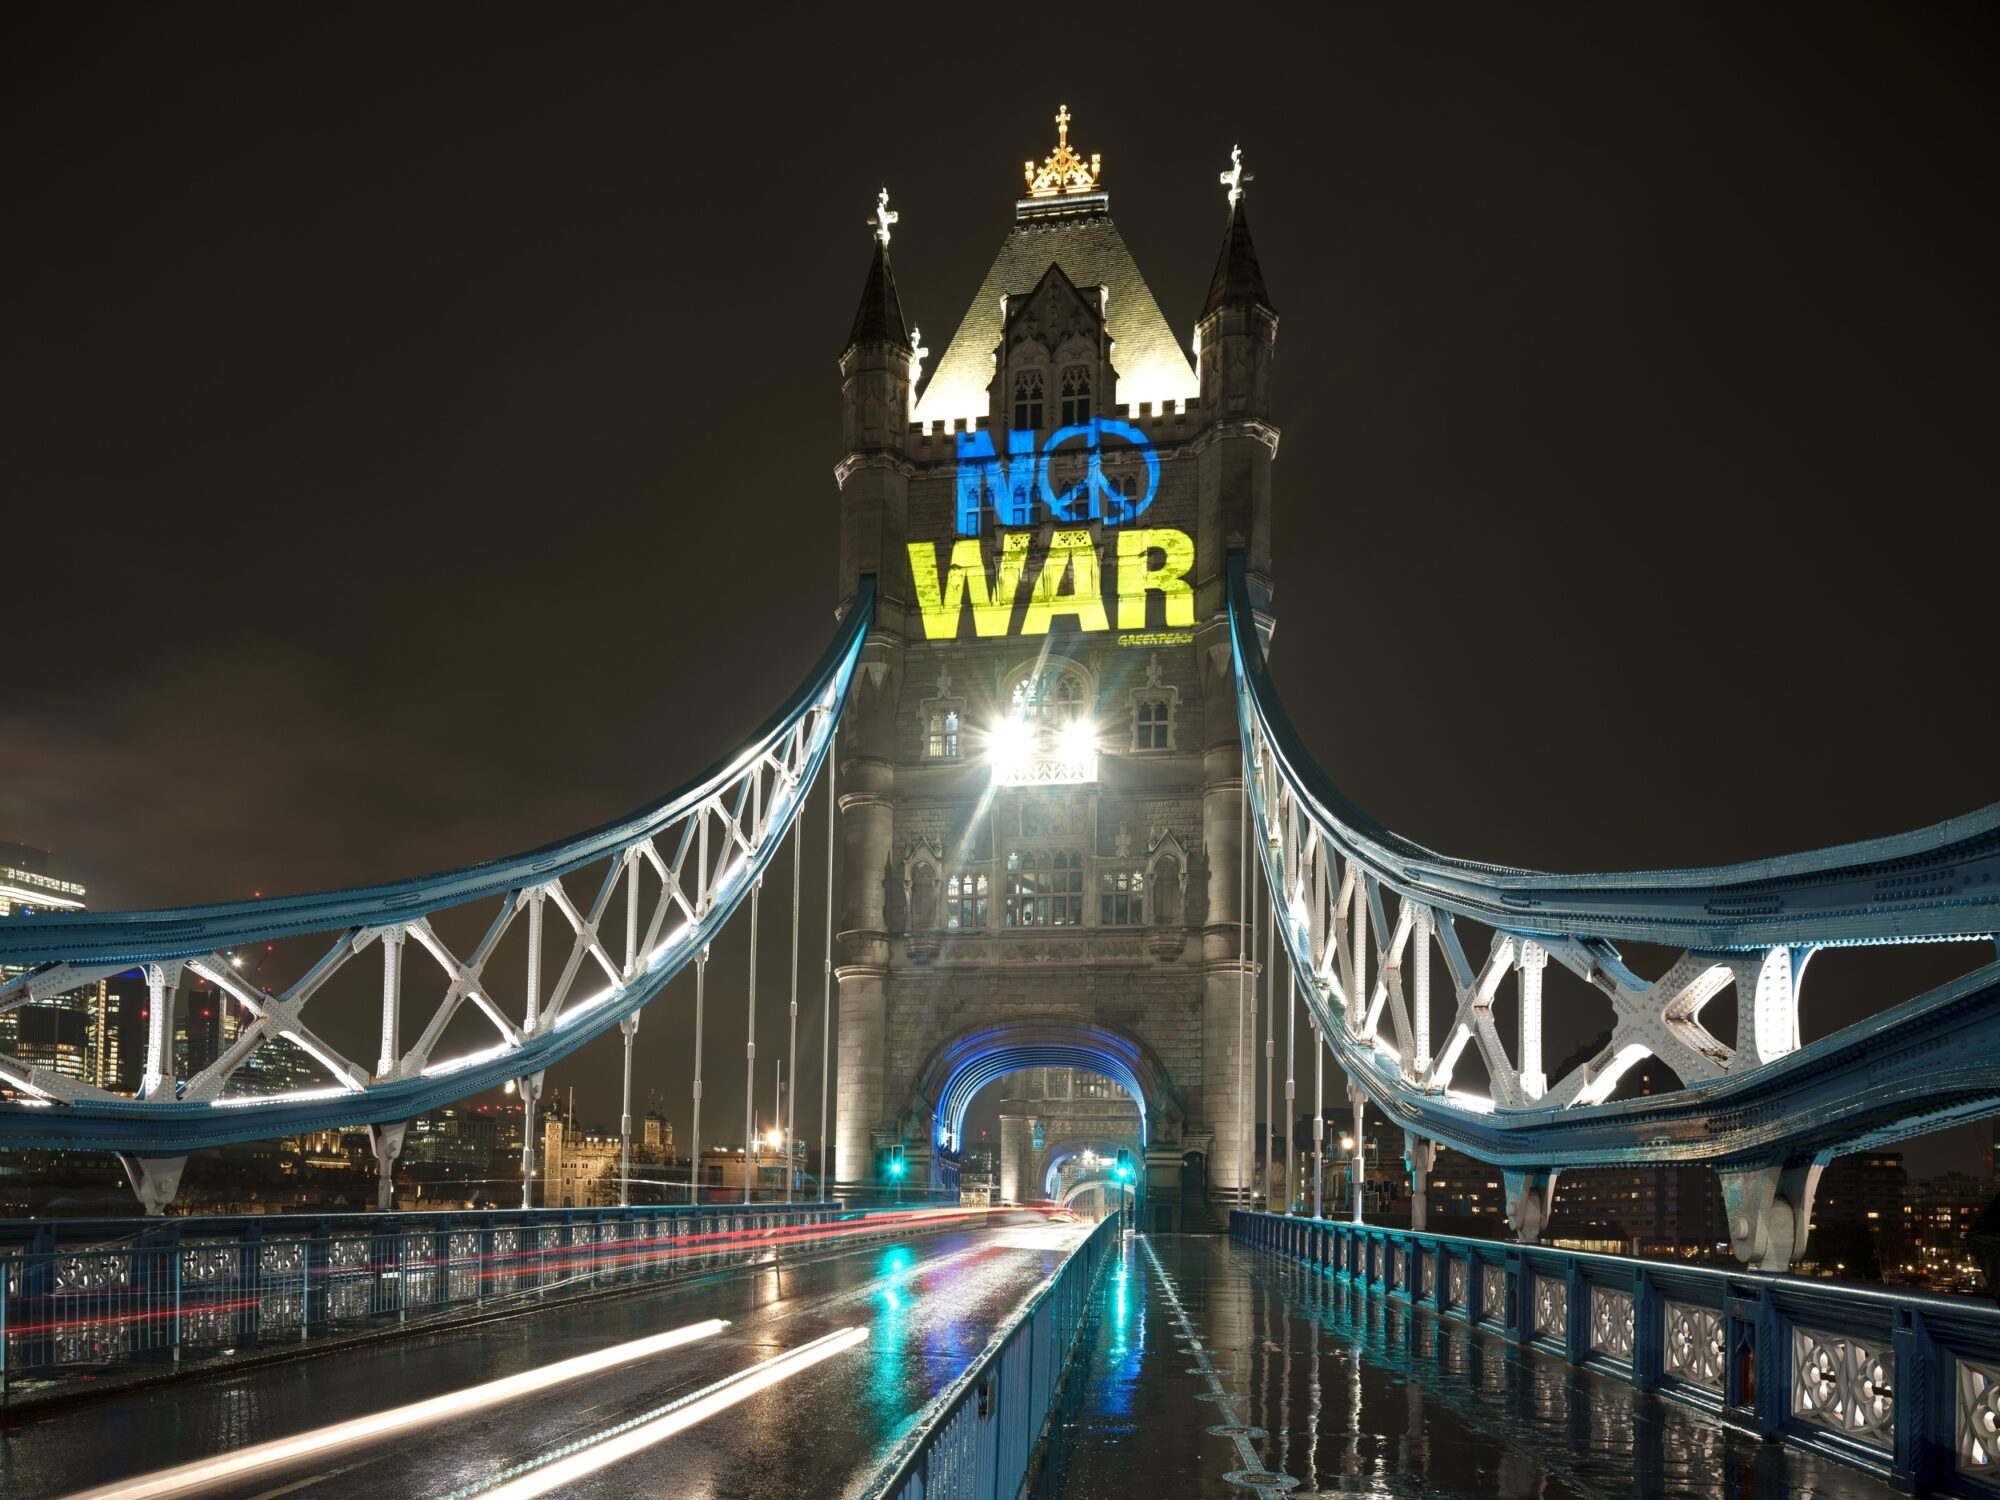 “No war” projected in blue and yellow (the colours of the Ukrainian flag) onto Tower bridge at night. The O in “no” has been changed to a peace sign.